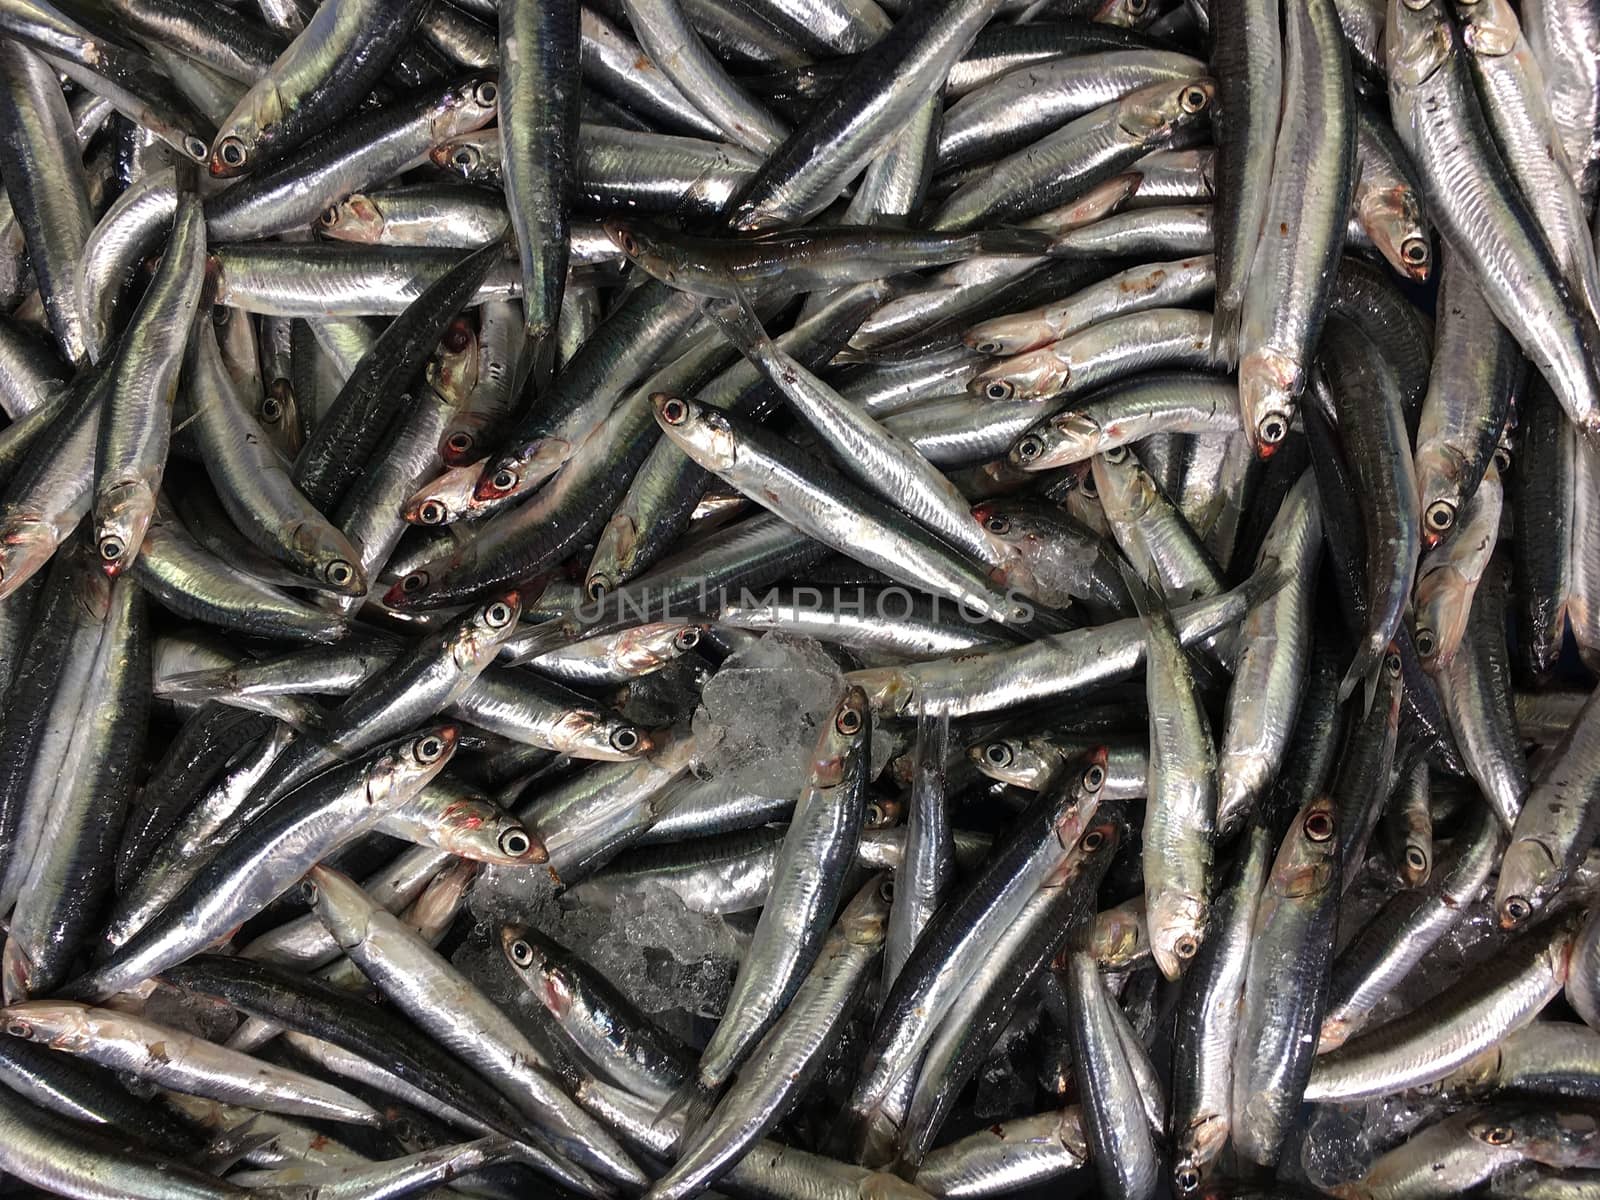 Sprats - Fish for sale on a market stall